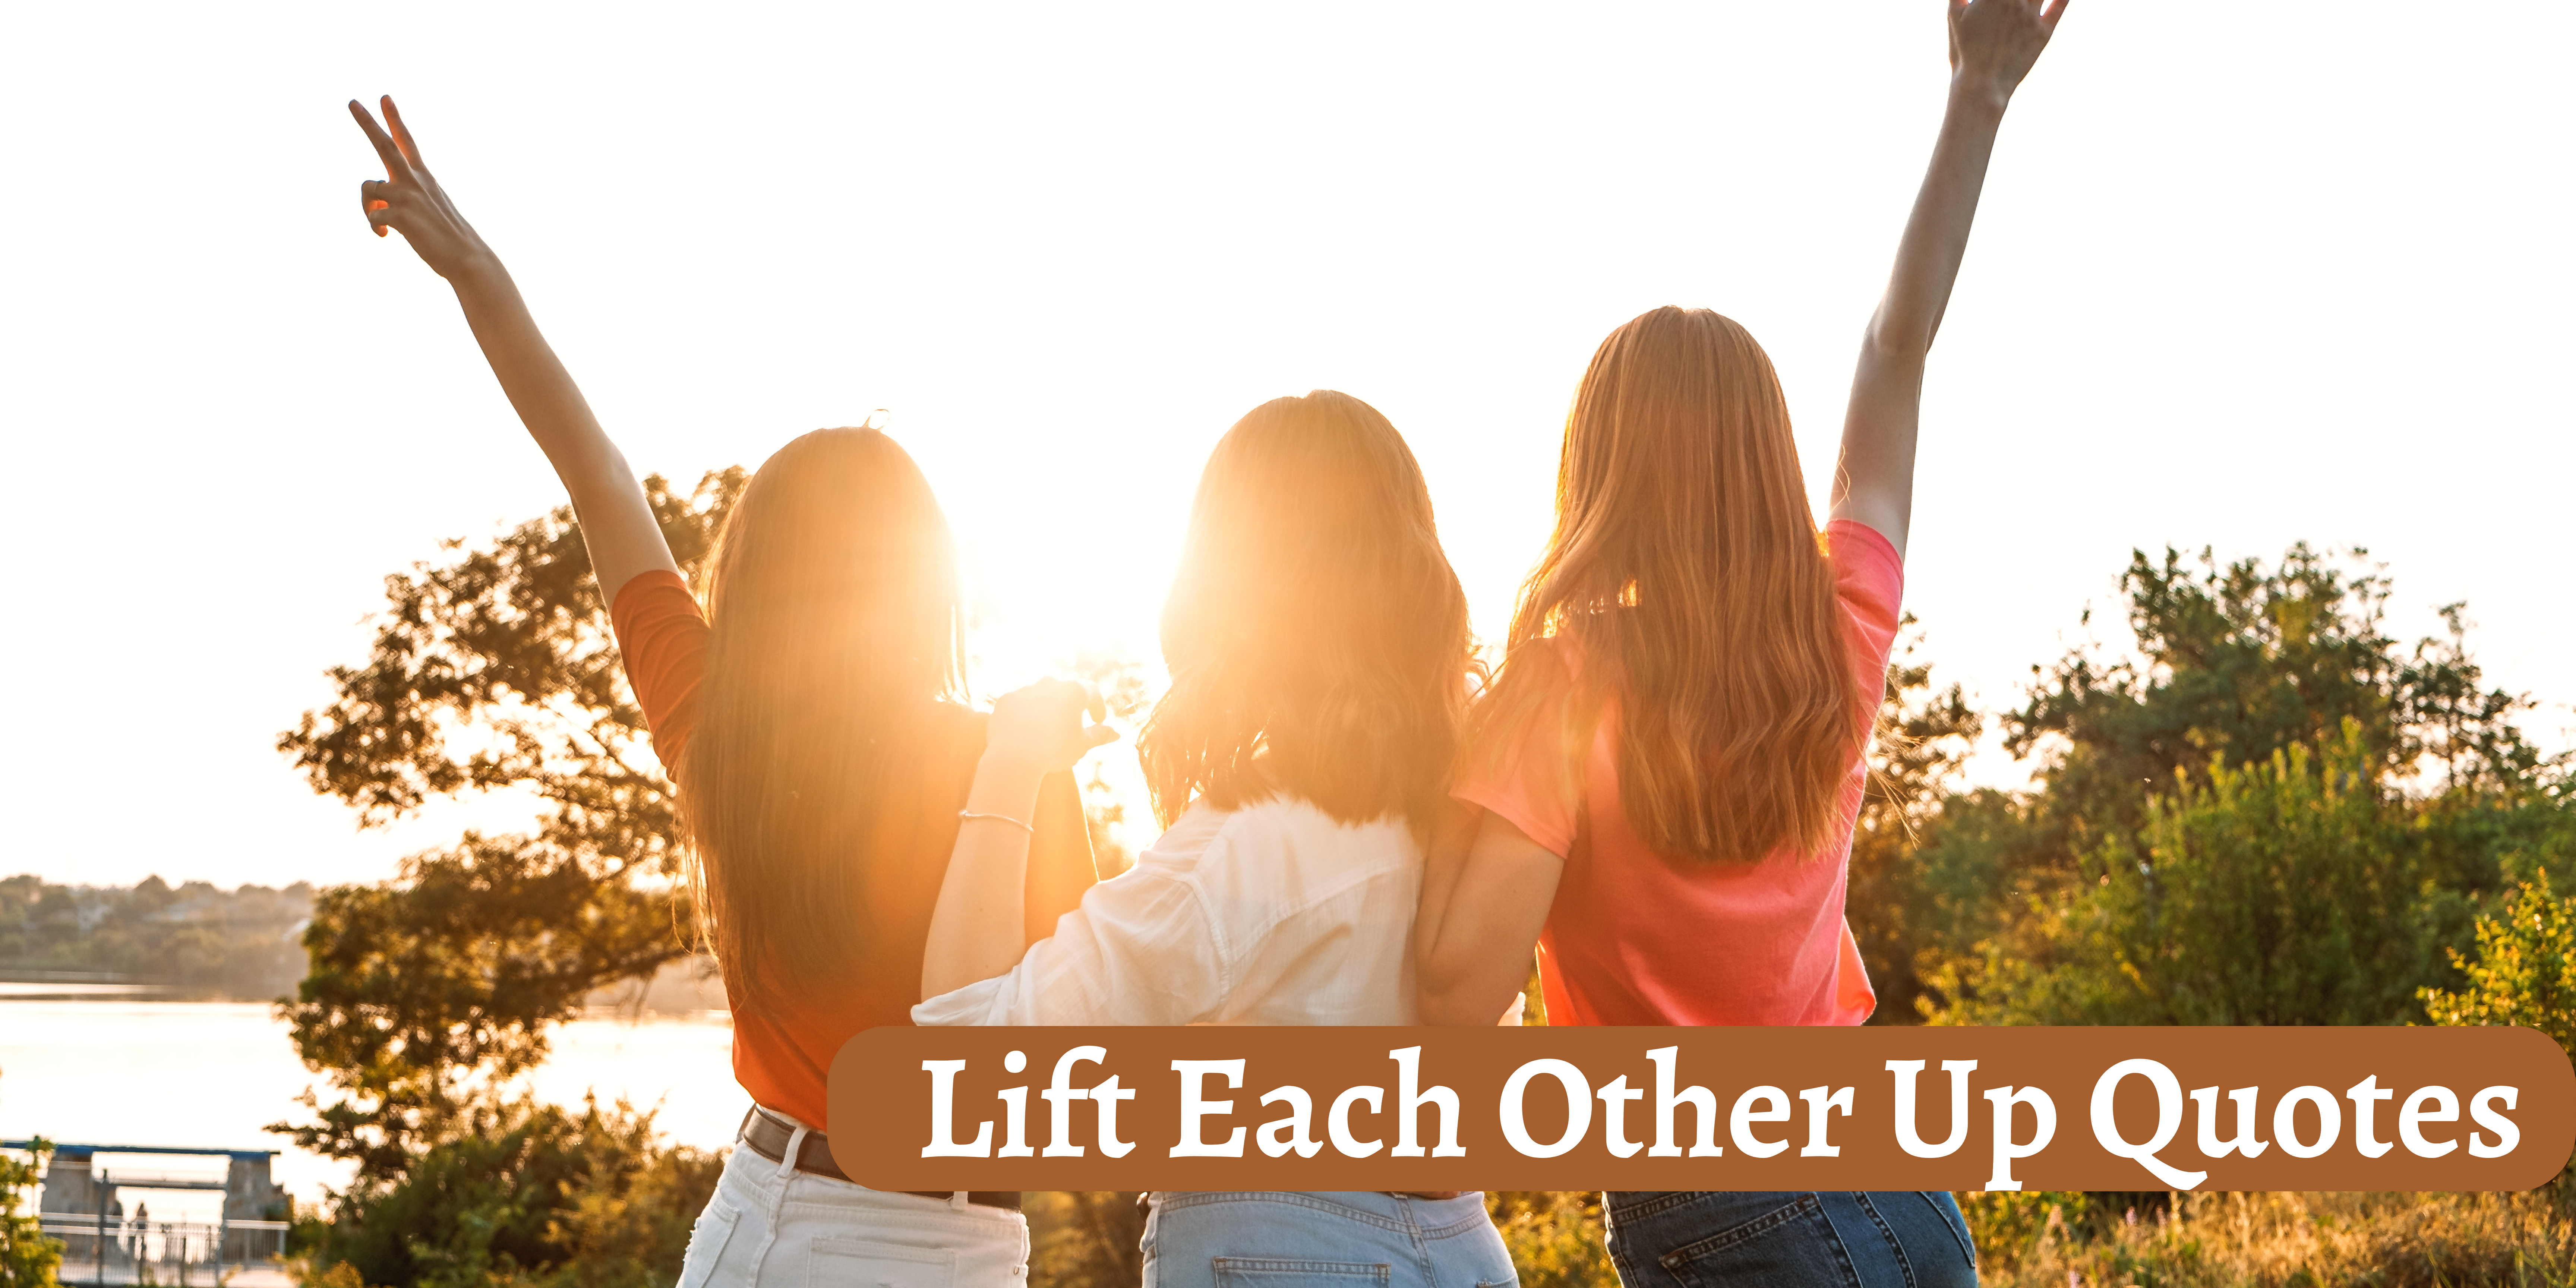 lift each other up quotes